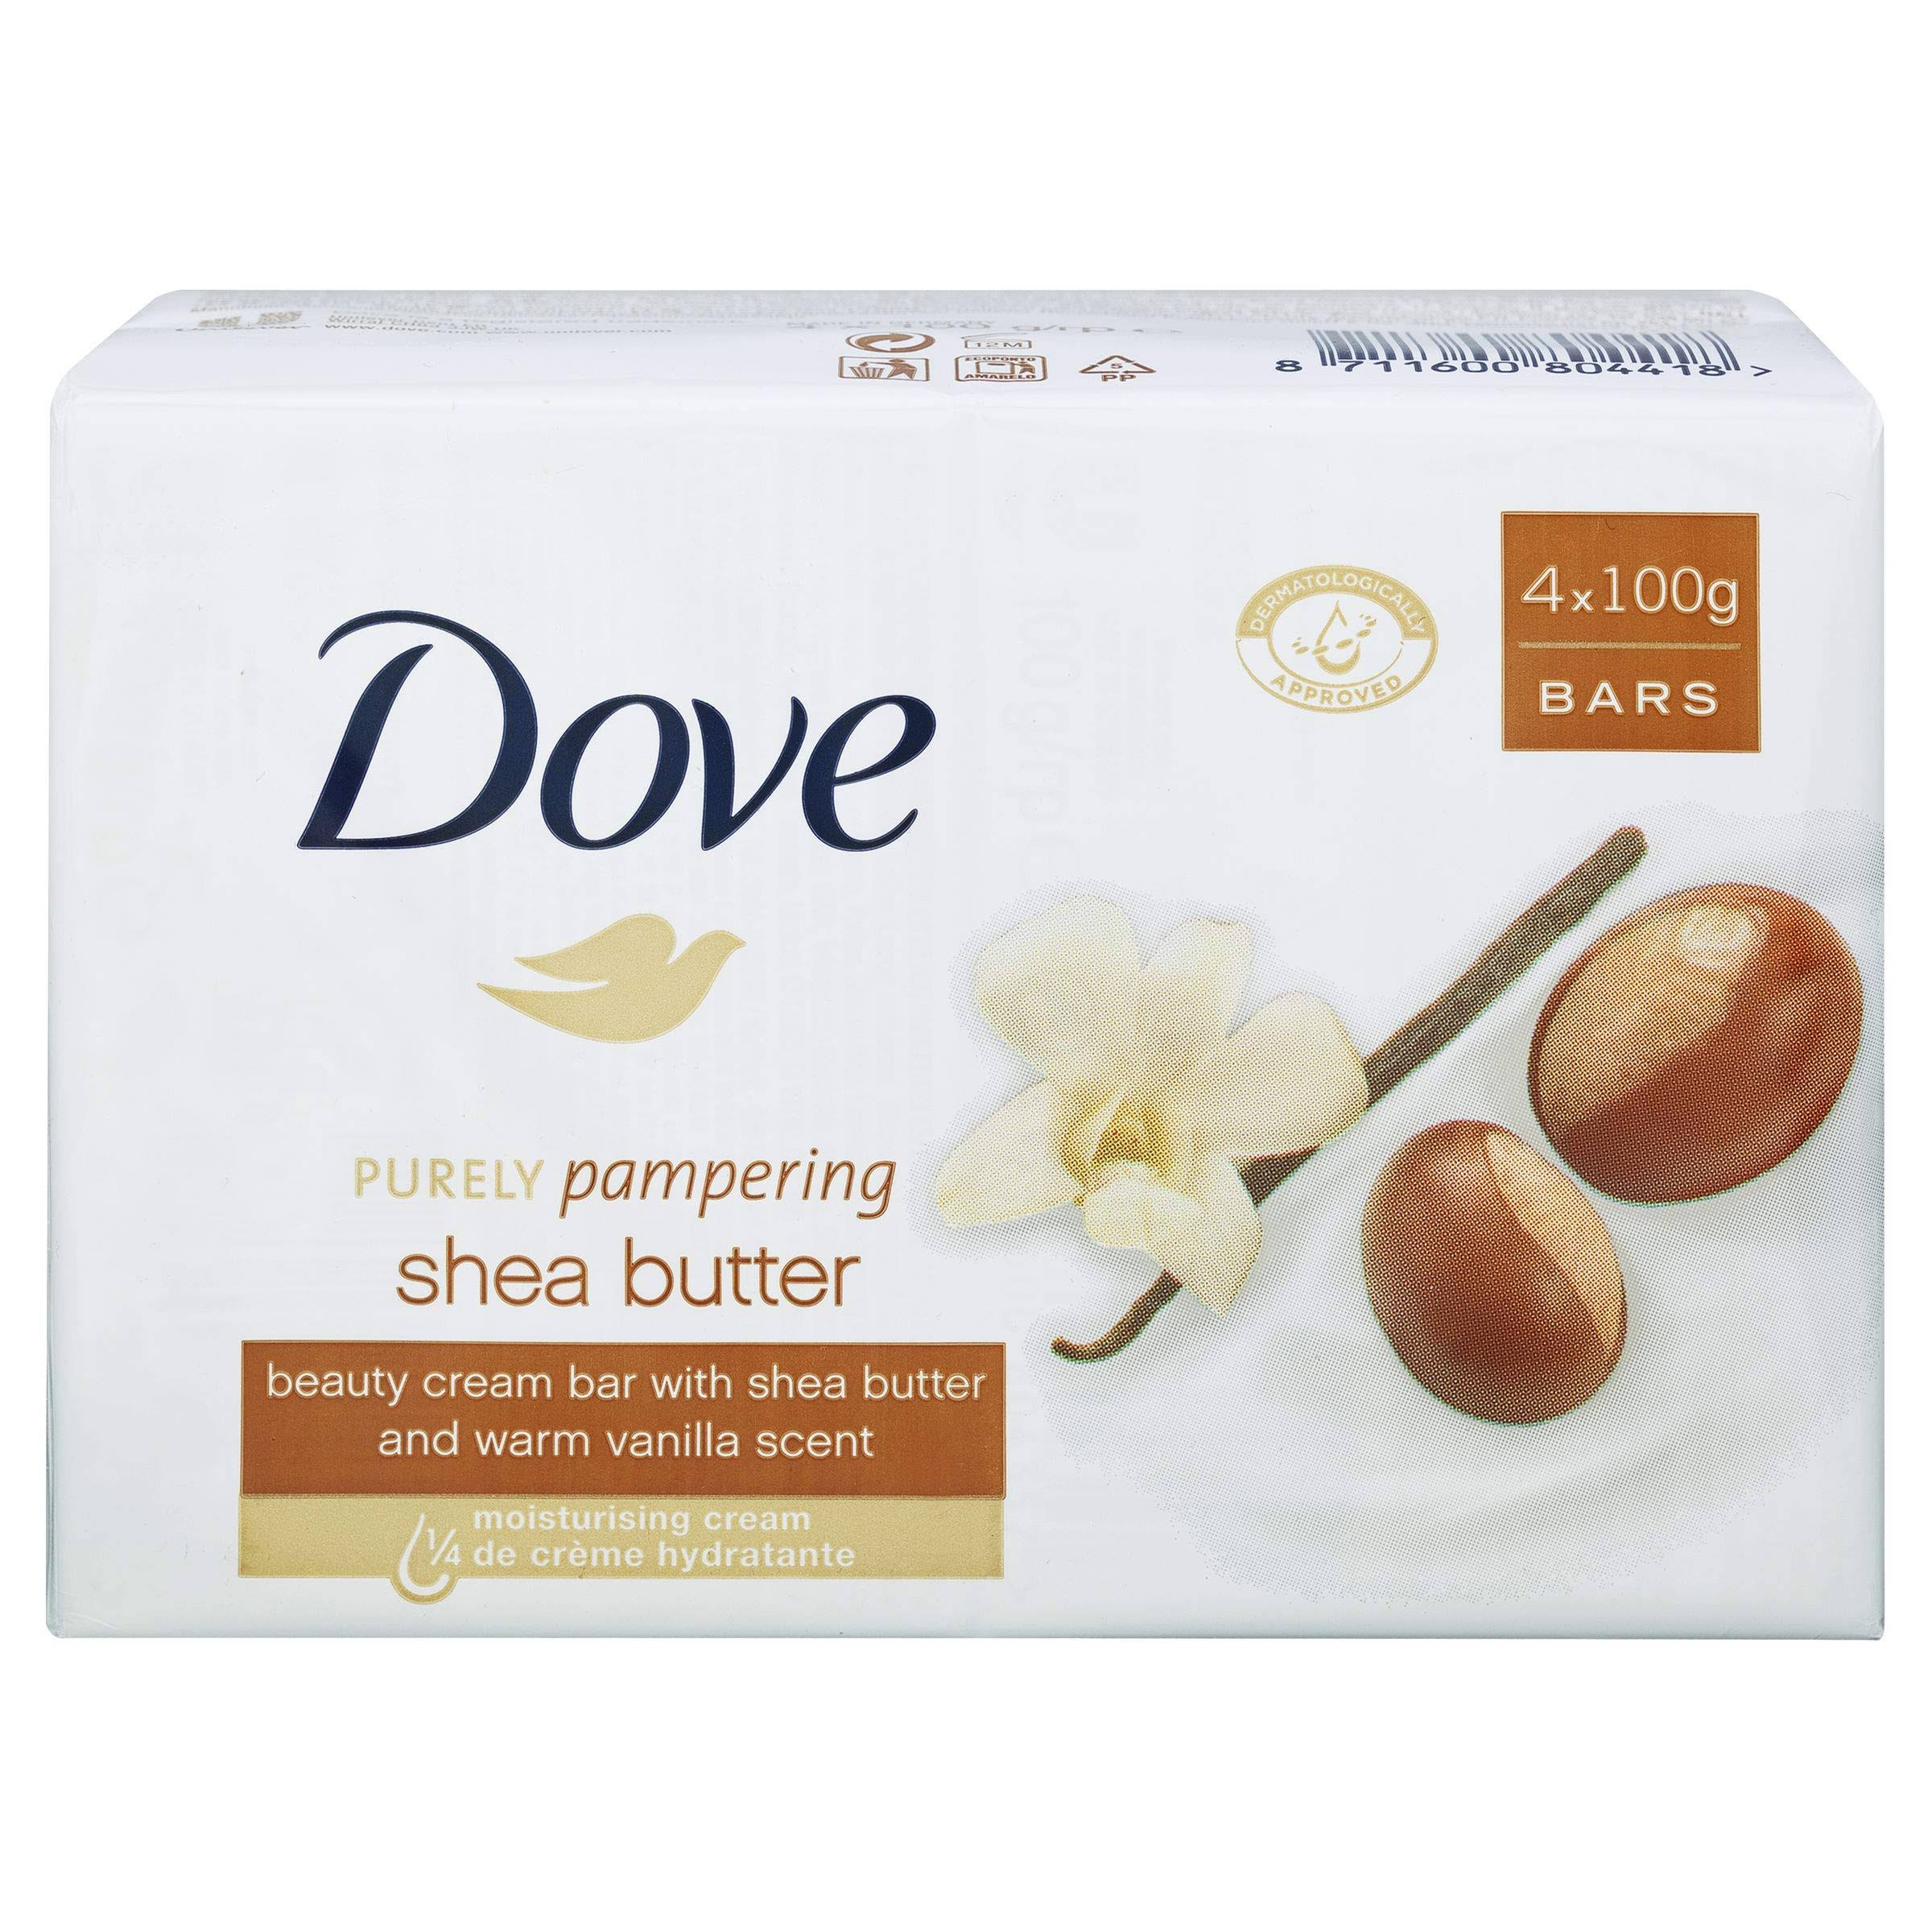 Dove Purely Pampering Shea Butter Soap - 100g, 2ct